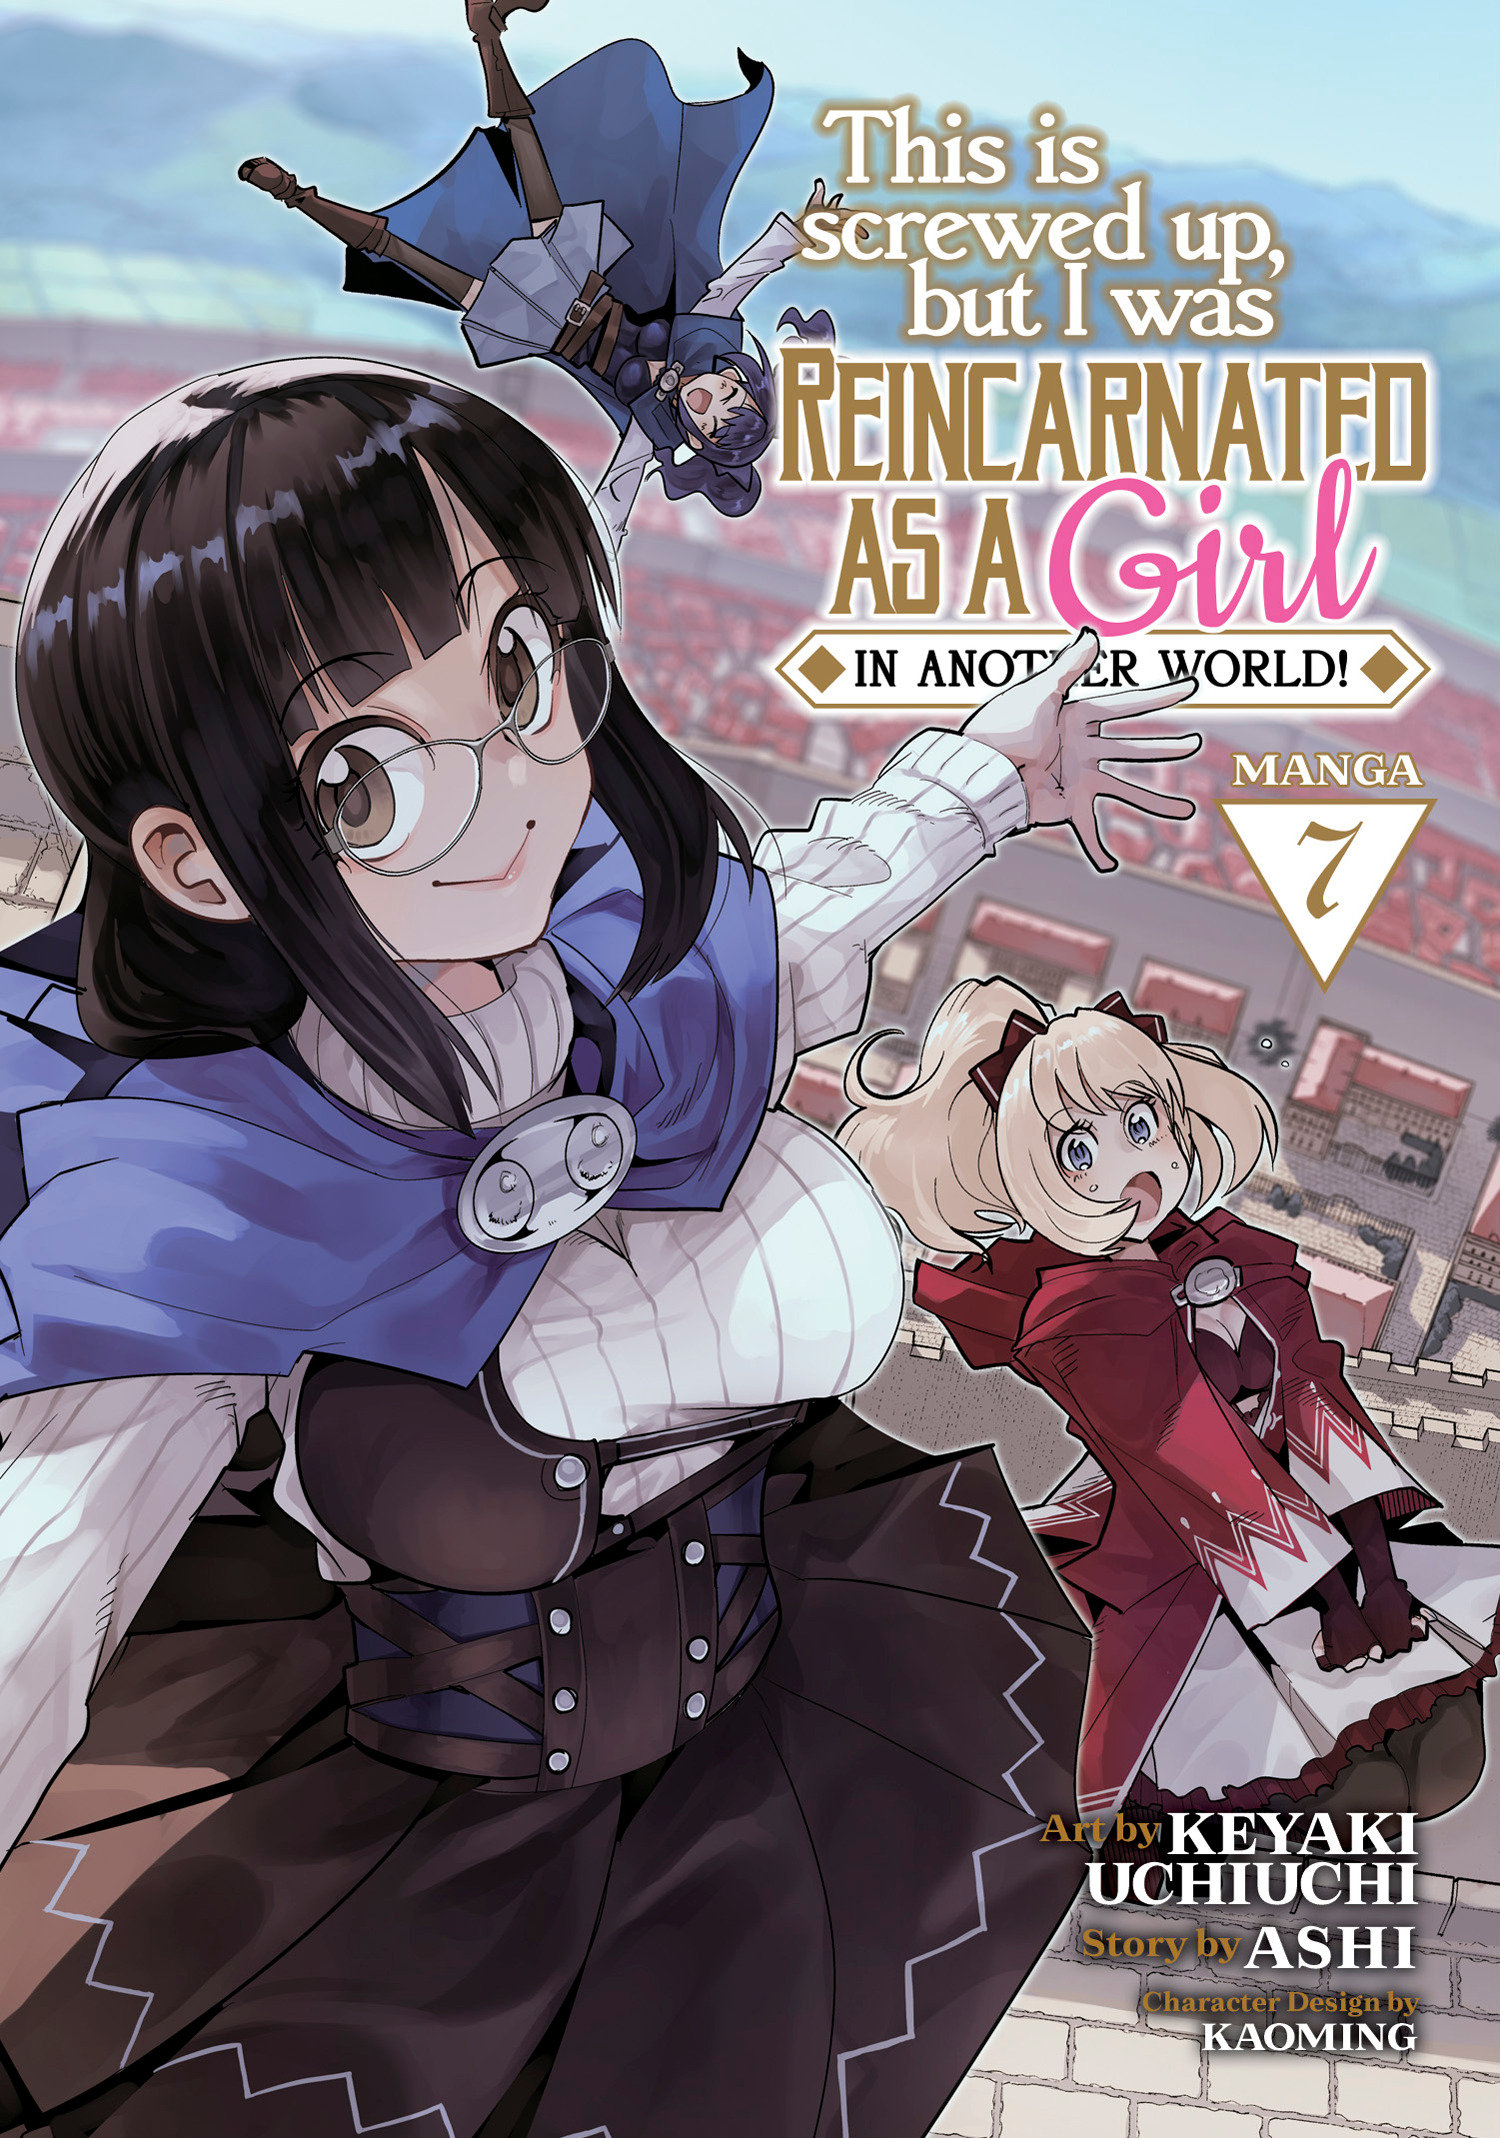 This is Screwed Up, But I Was Reincarnated as a Girl in Another World! Manga Volume 7